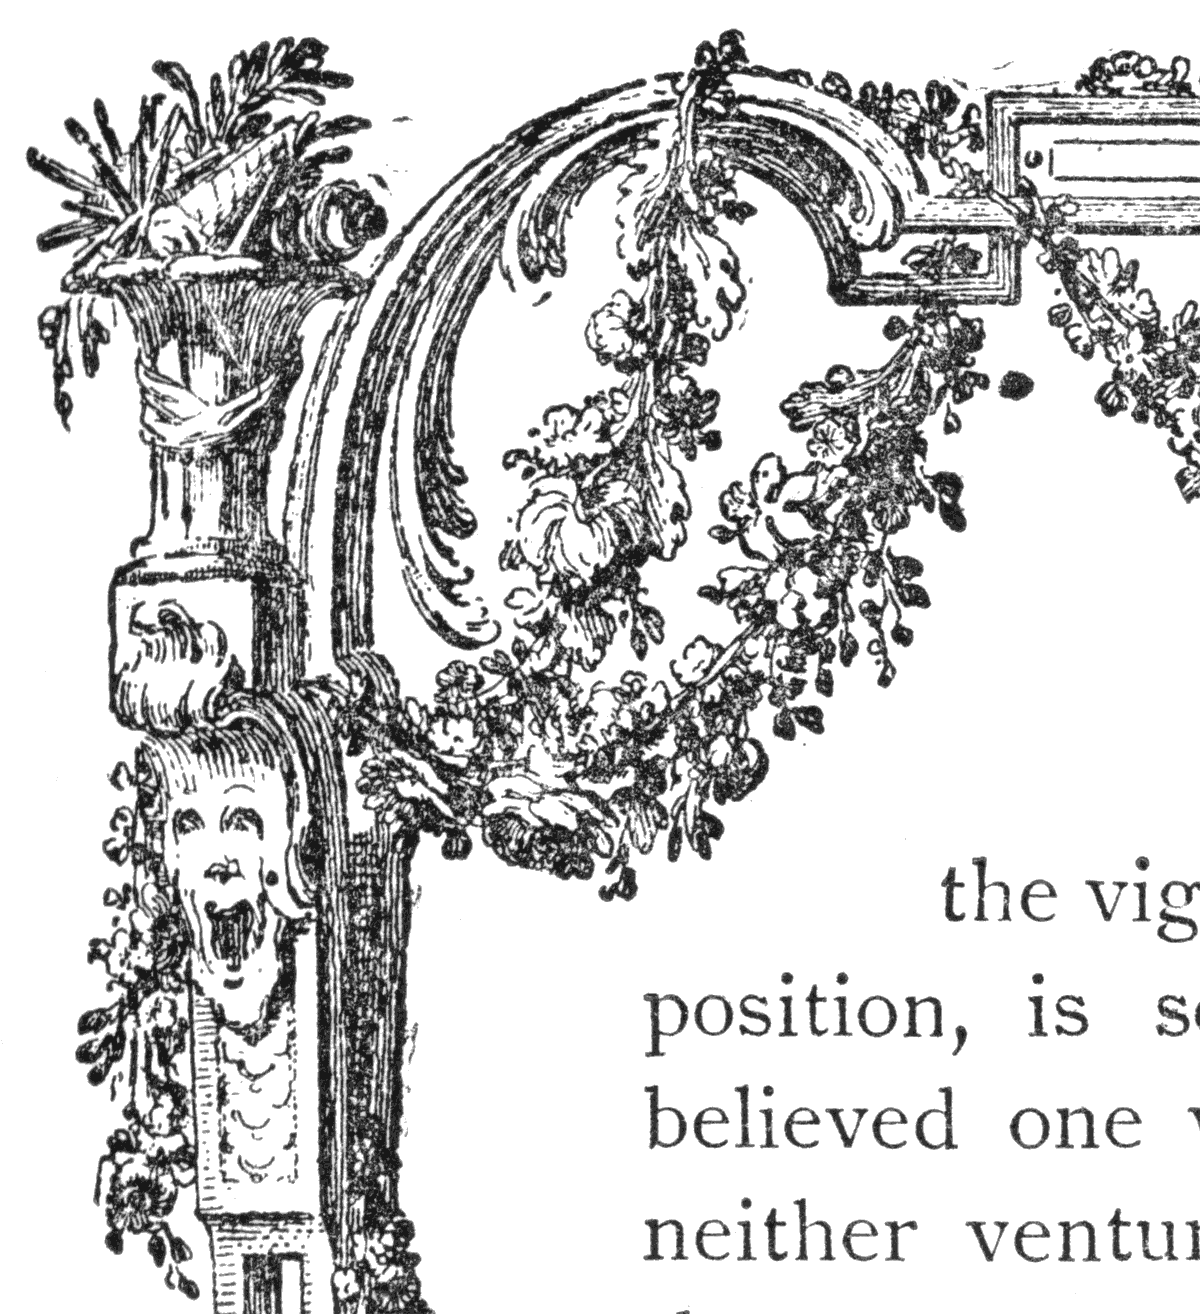 Detail of top left side of border designed by Choffard, the French engraver, in 1758. From Henri Bouchot 'The Printed Book' 1887, page 197, published size in Bouchot 2.54 cm wide by 2.78 cm high.